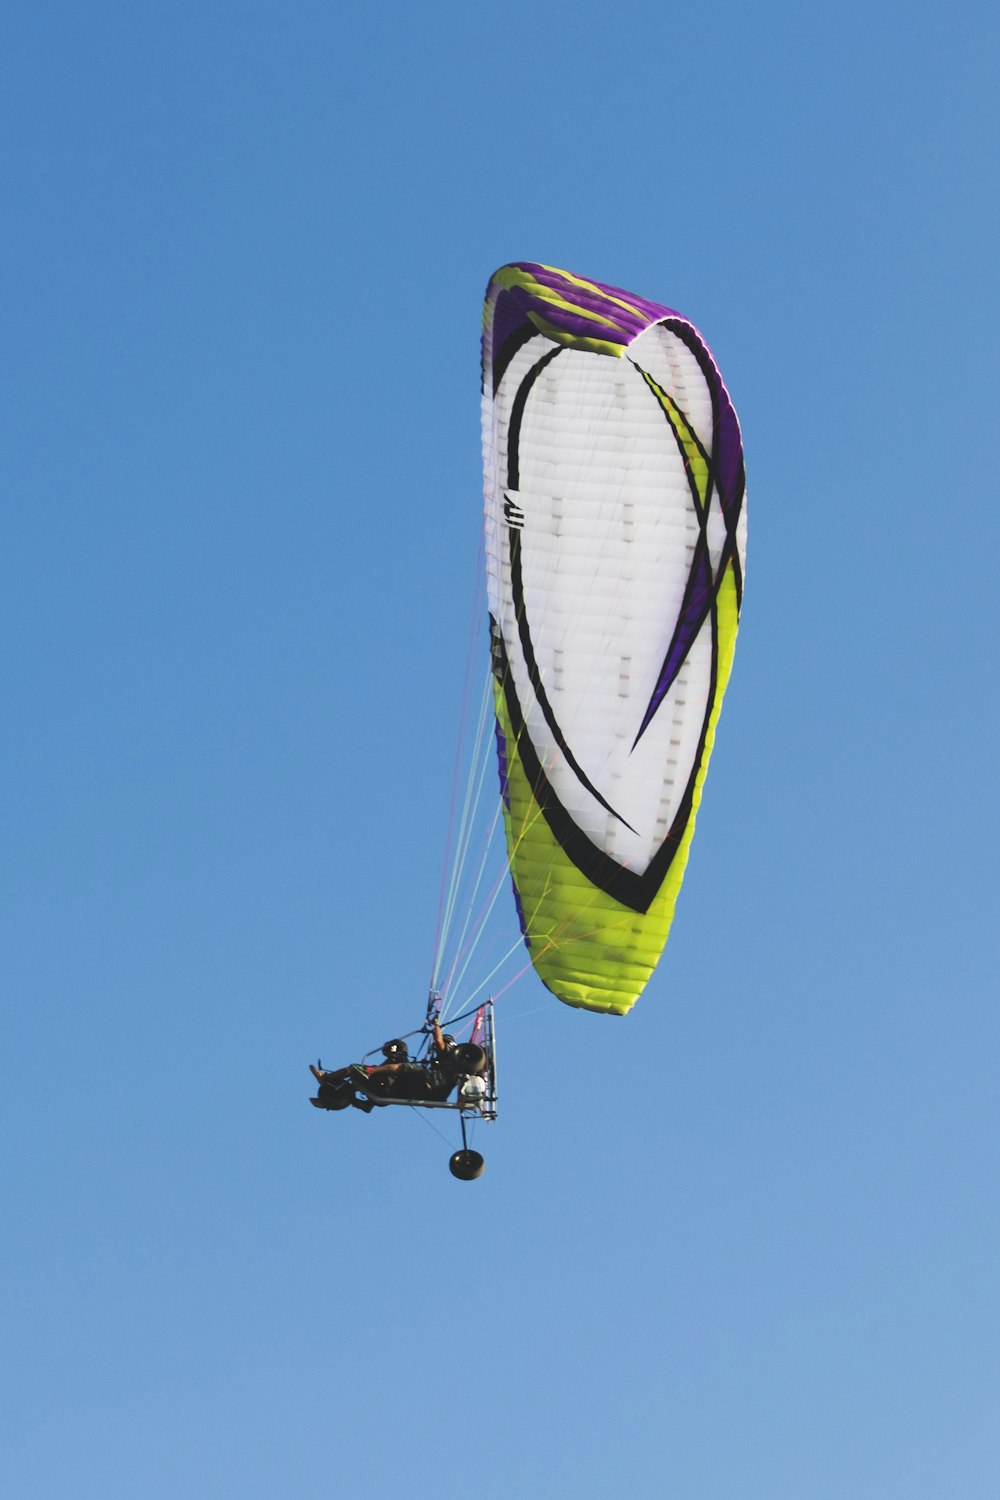 white and green vehicle with parachute flying during daytime